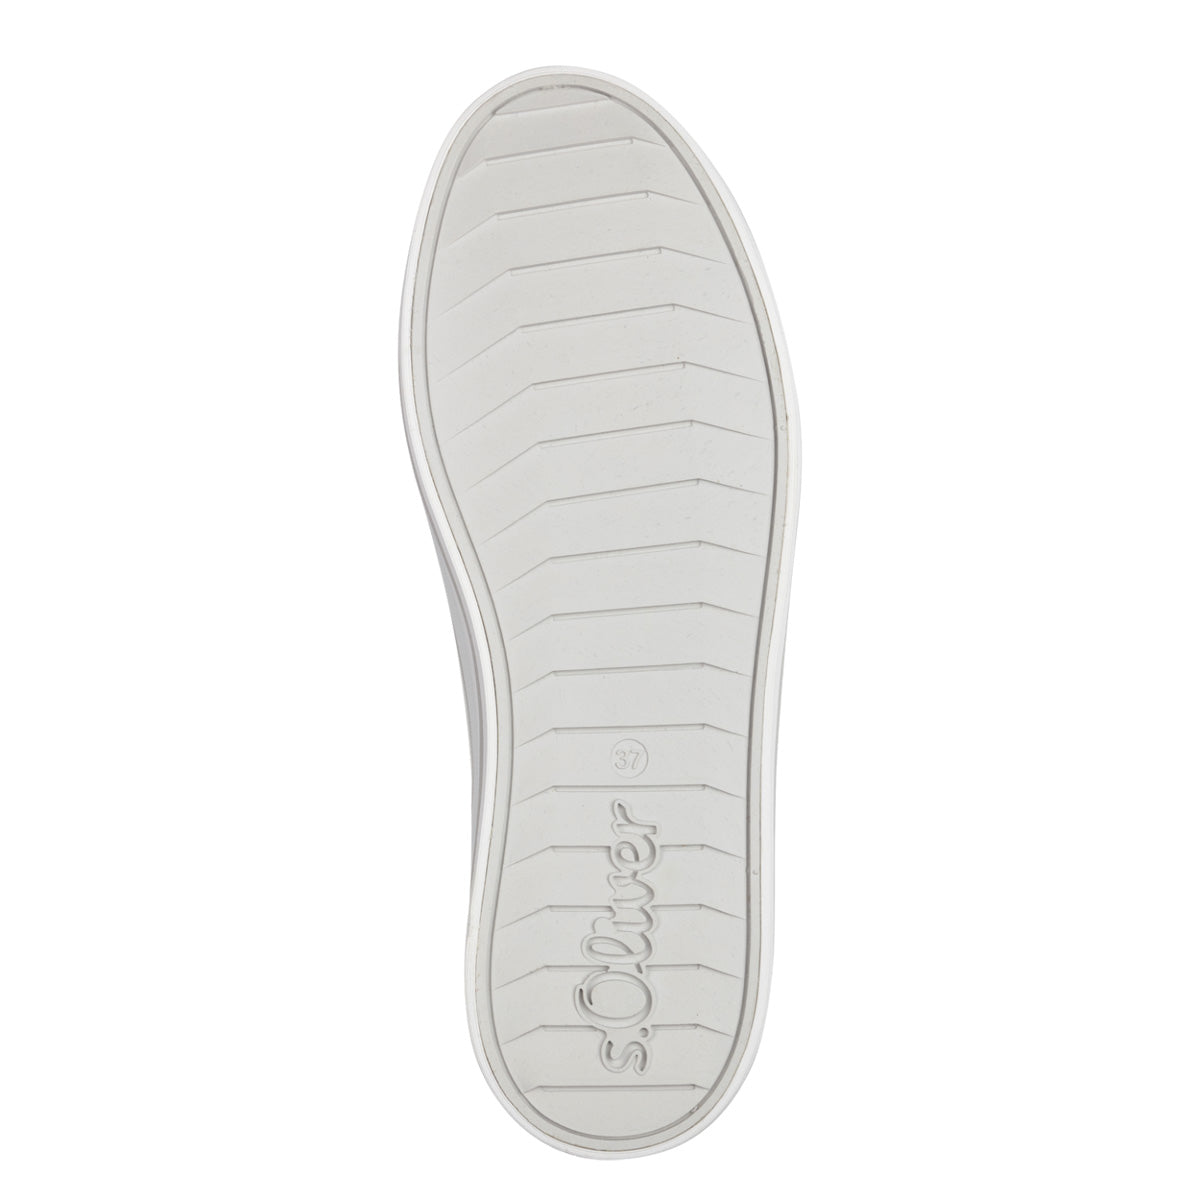 Side view of S.Oliver White Flat Runners, showcasing the breathable textile upper.